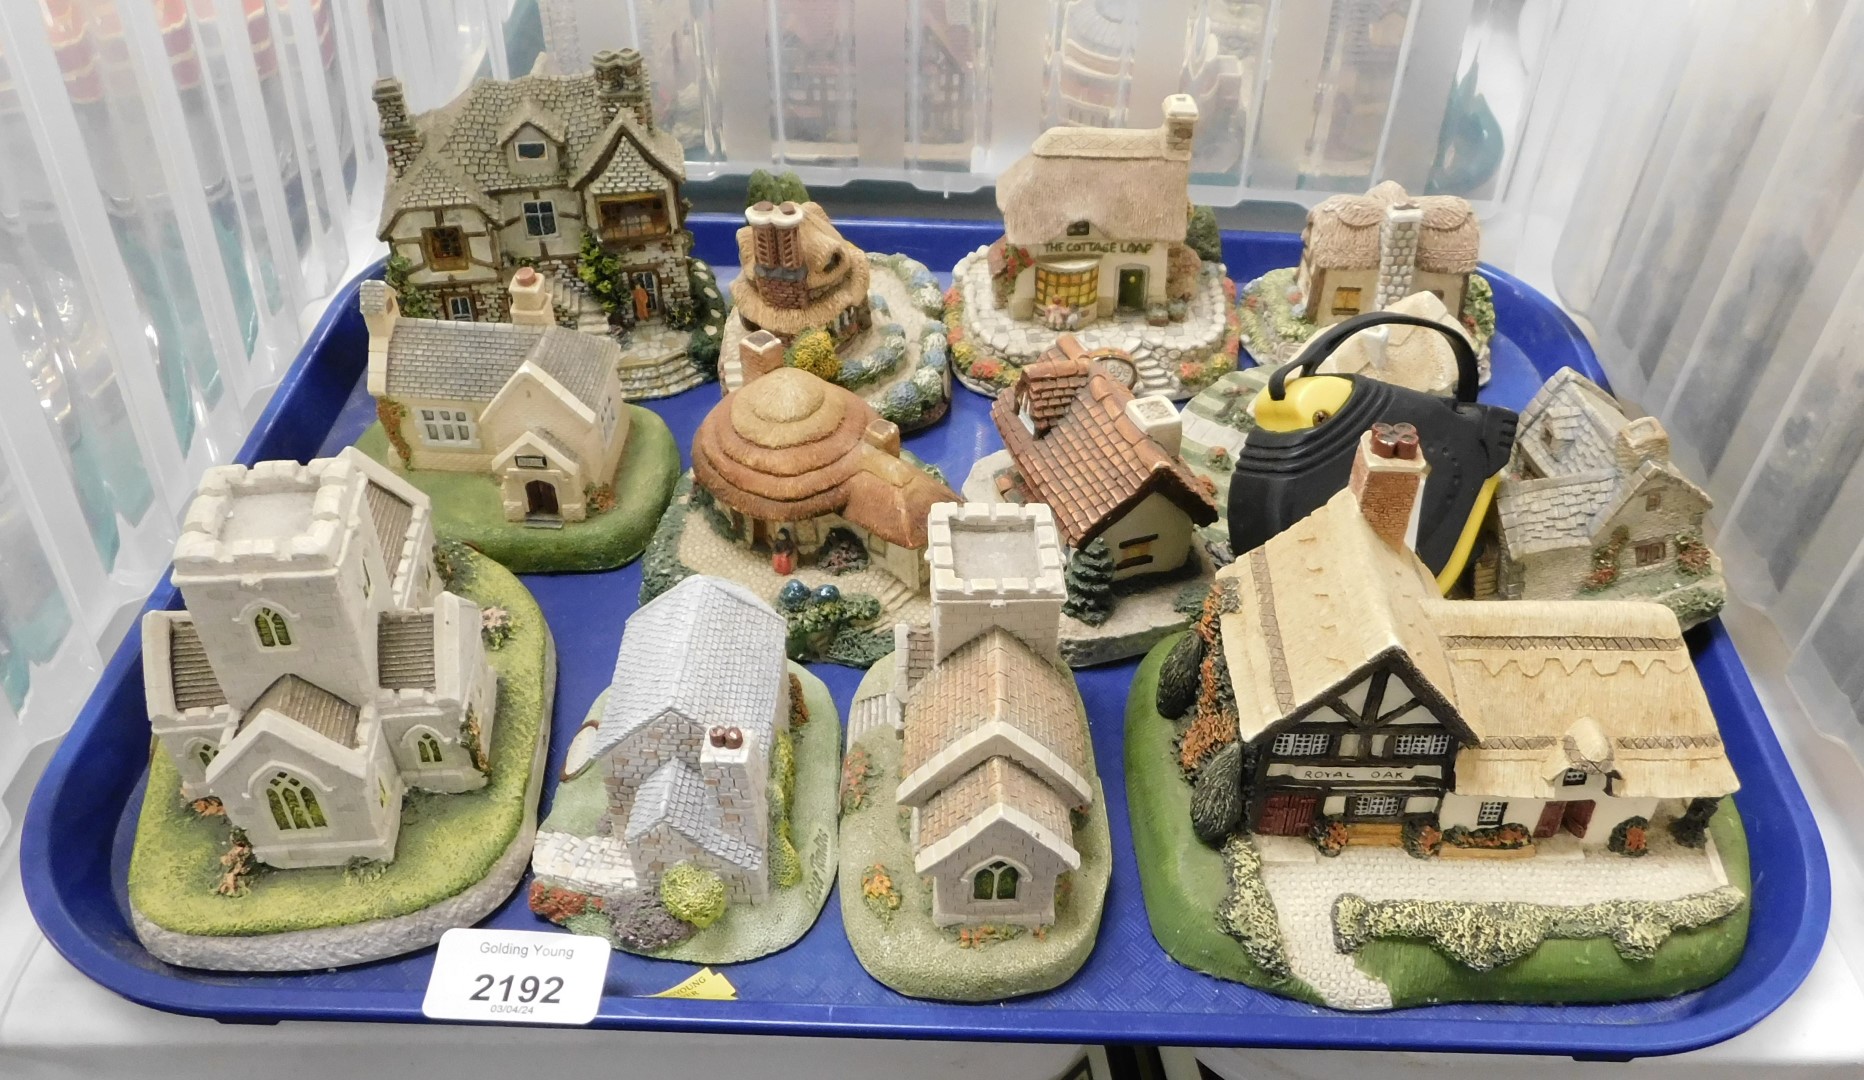 A quantity of Memory Lane cottages. (13, on 1 tray)